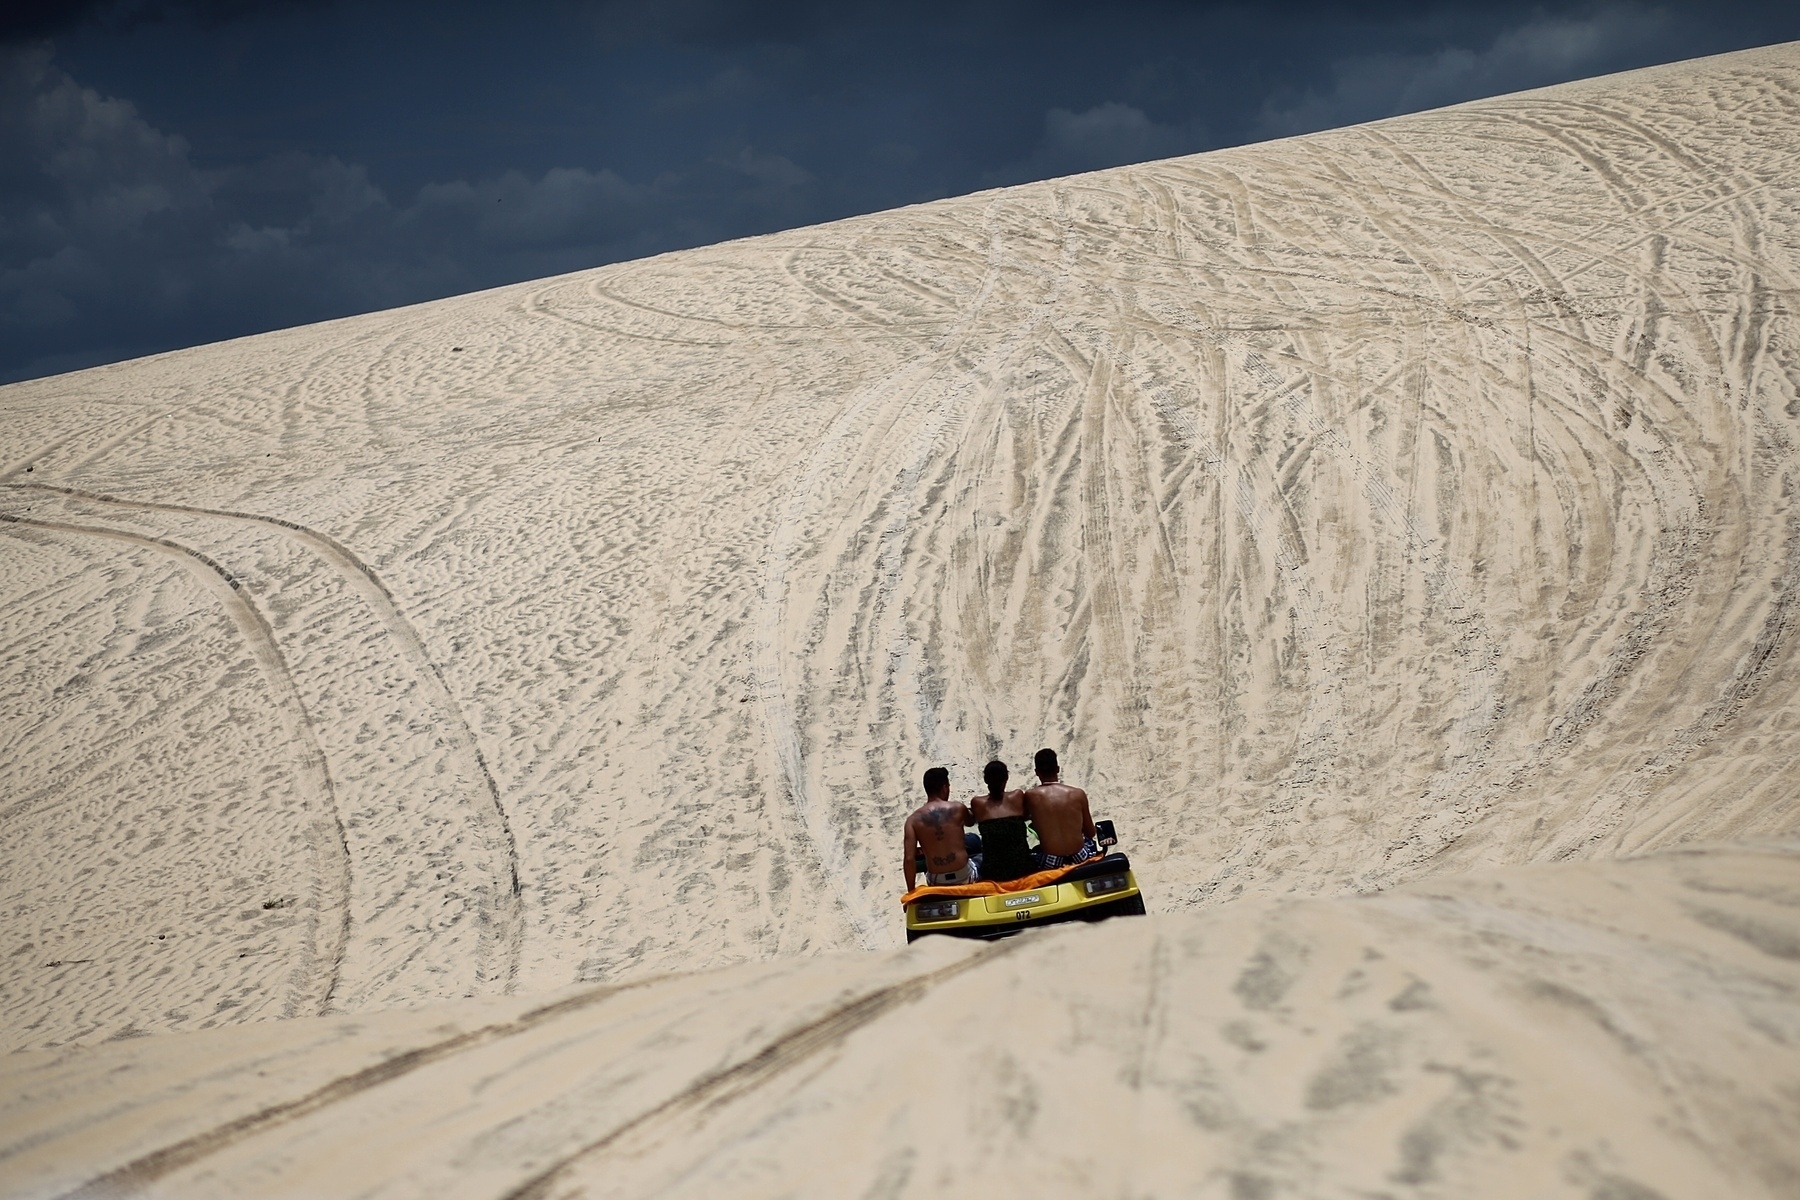 Three people sit on a buggy going down a dune.